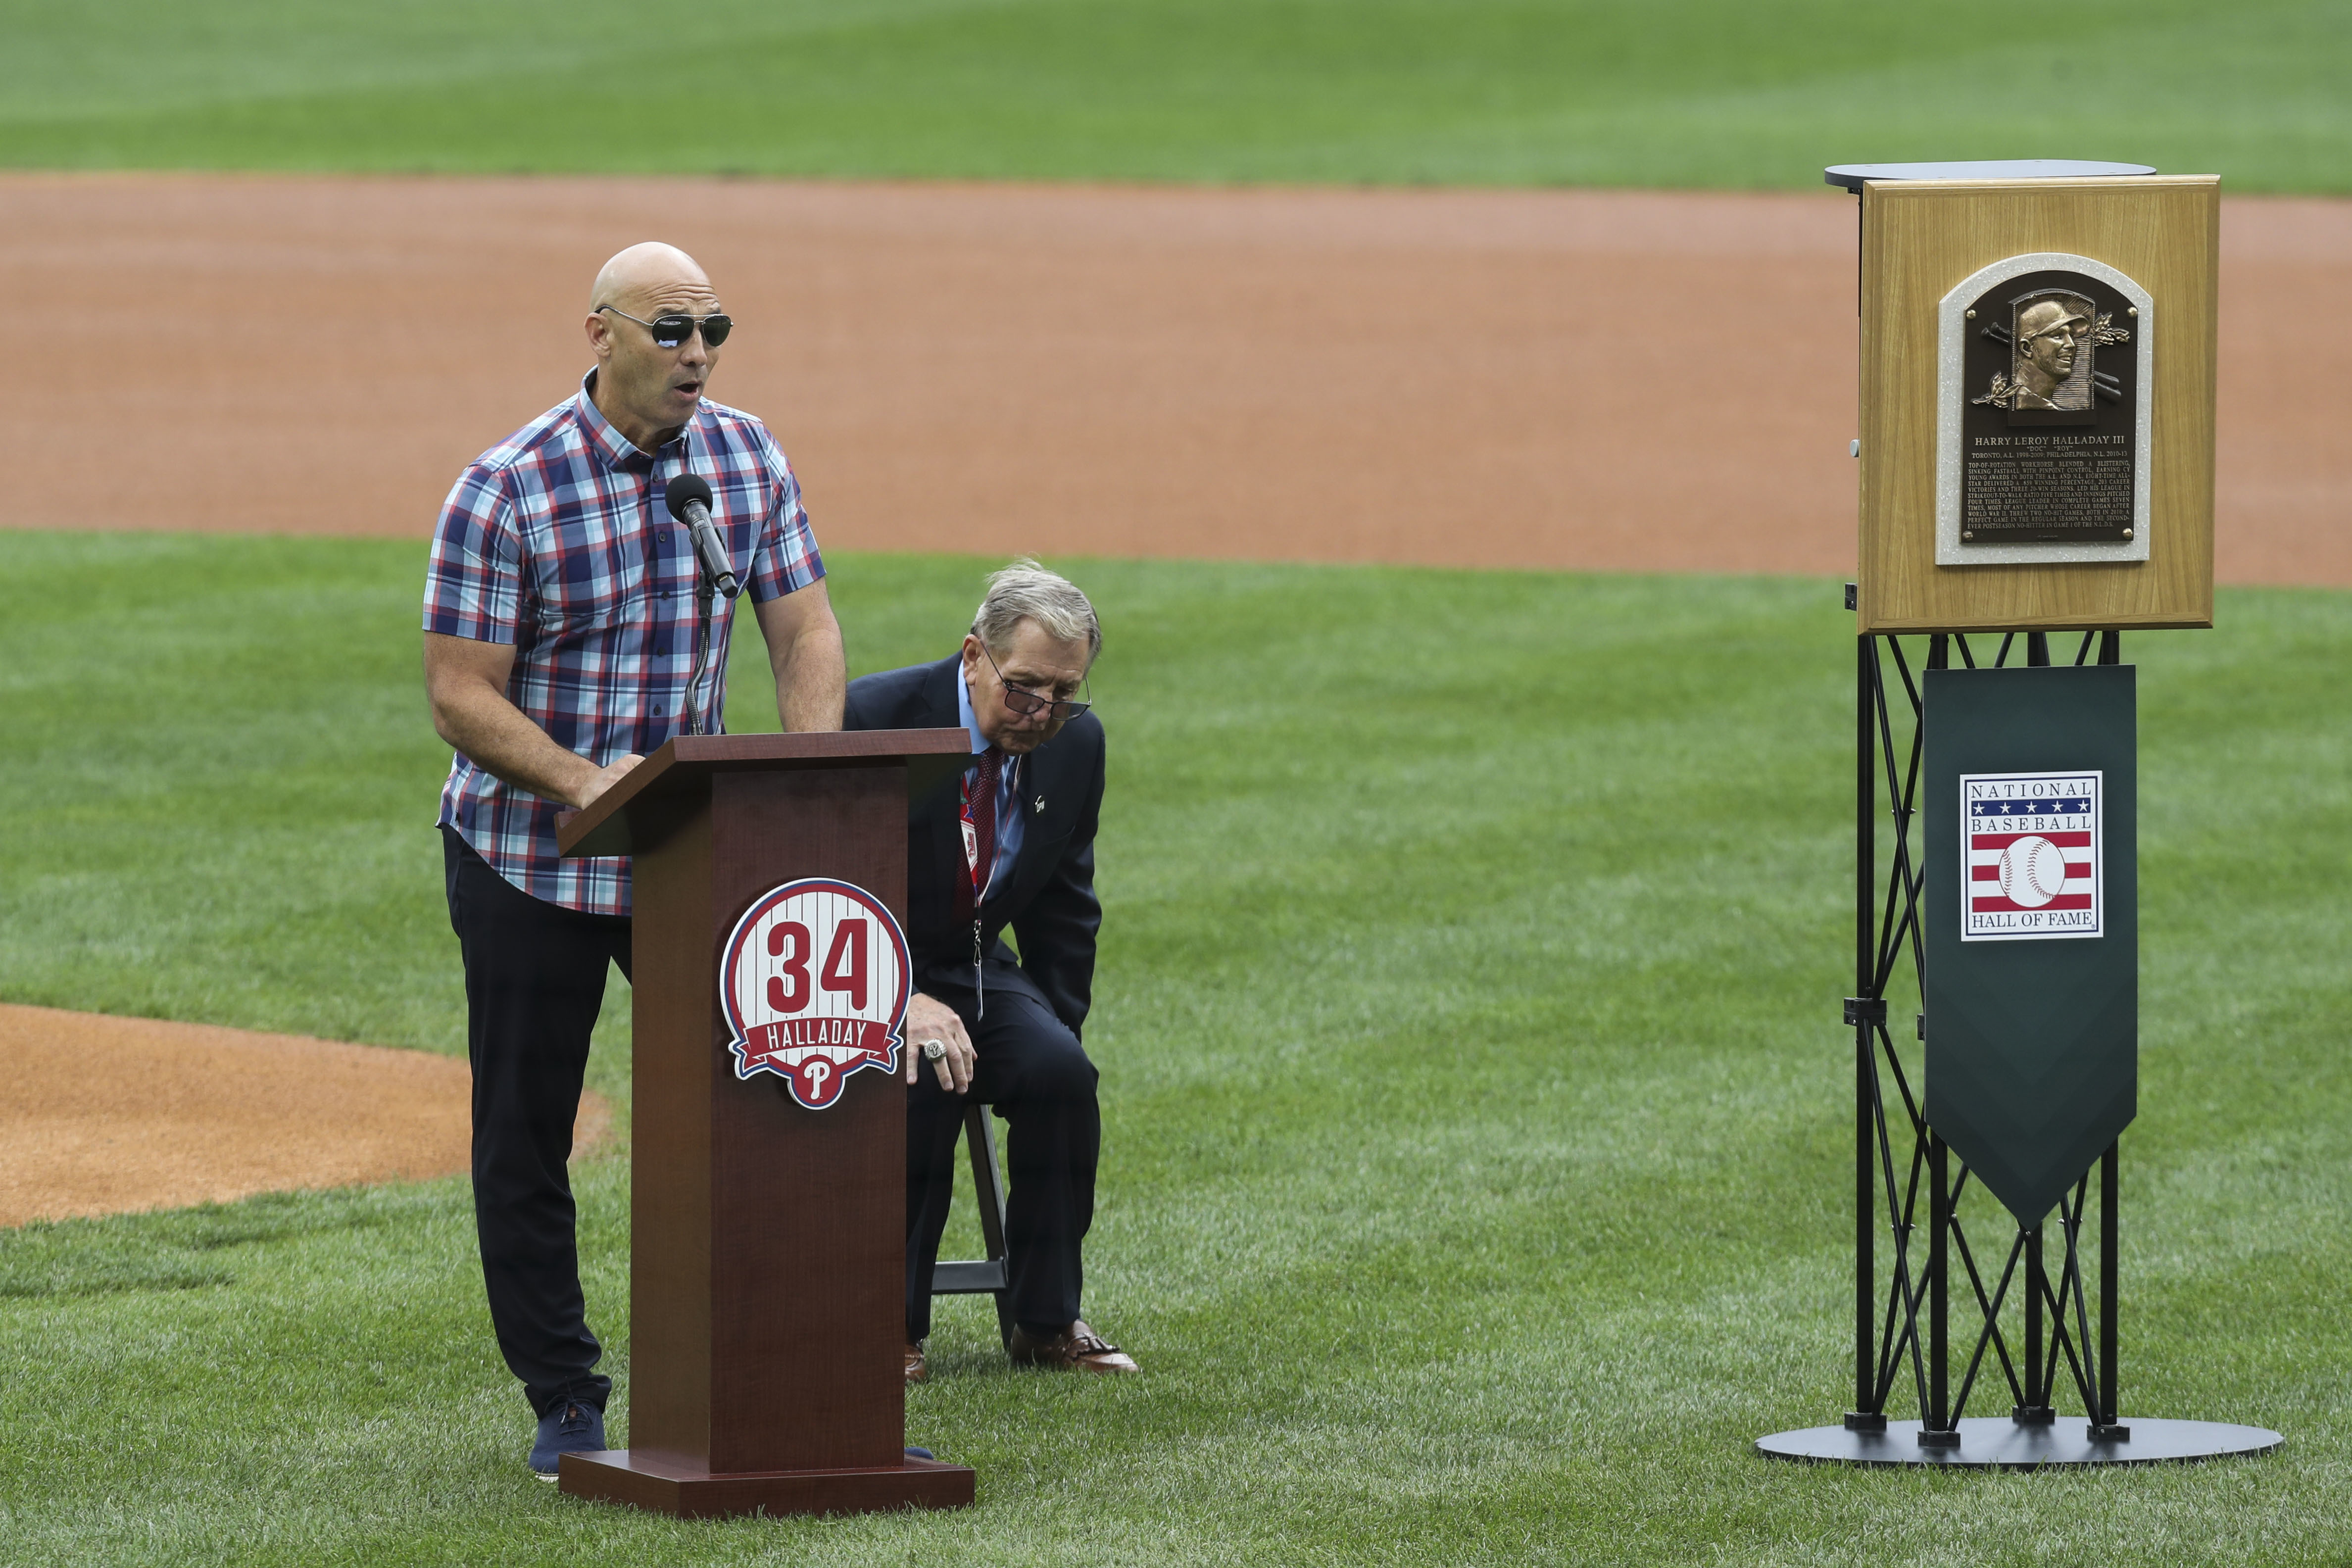 Phillies announce new date for Roy Halladay number retirement